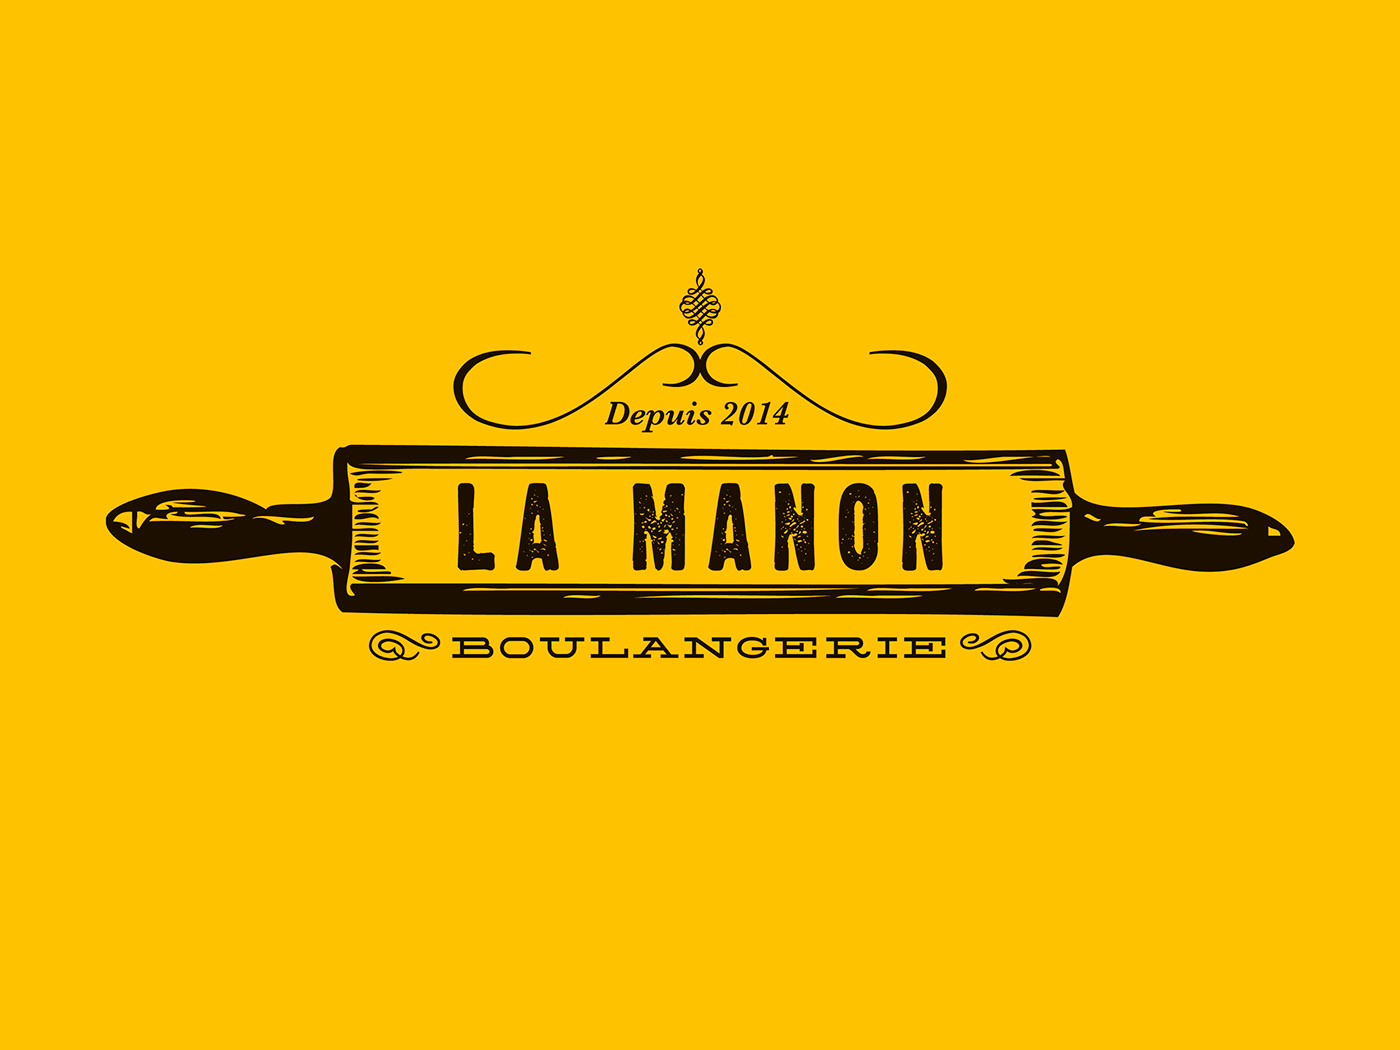 bakery logo corporate image brand yellow vintage French